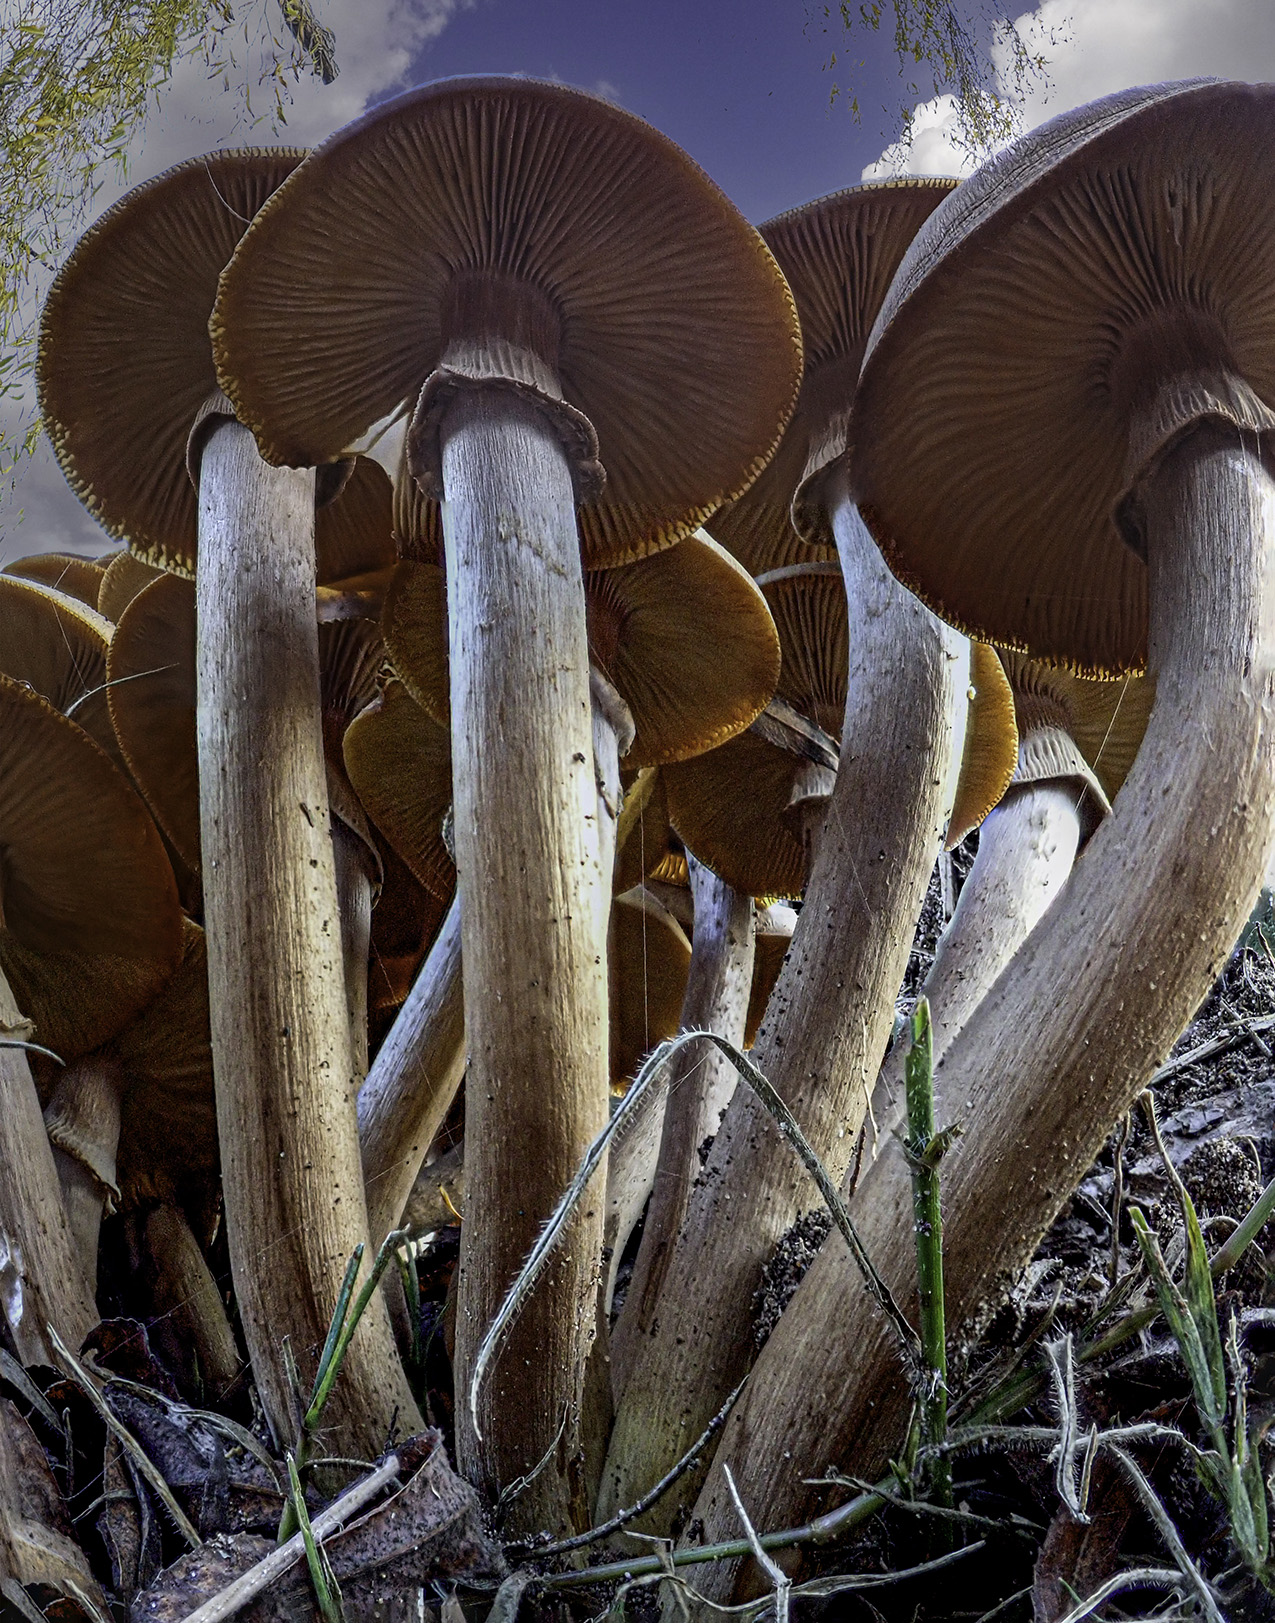 photo of mushrooms with long stems shot from underneath; the mushroom stems and caps take up the entire frame with a small bit of blue sky and puffy clouds behind